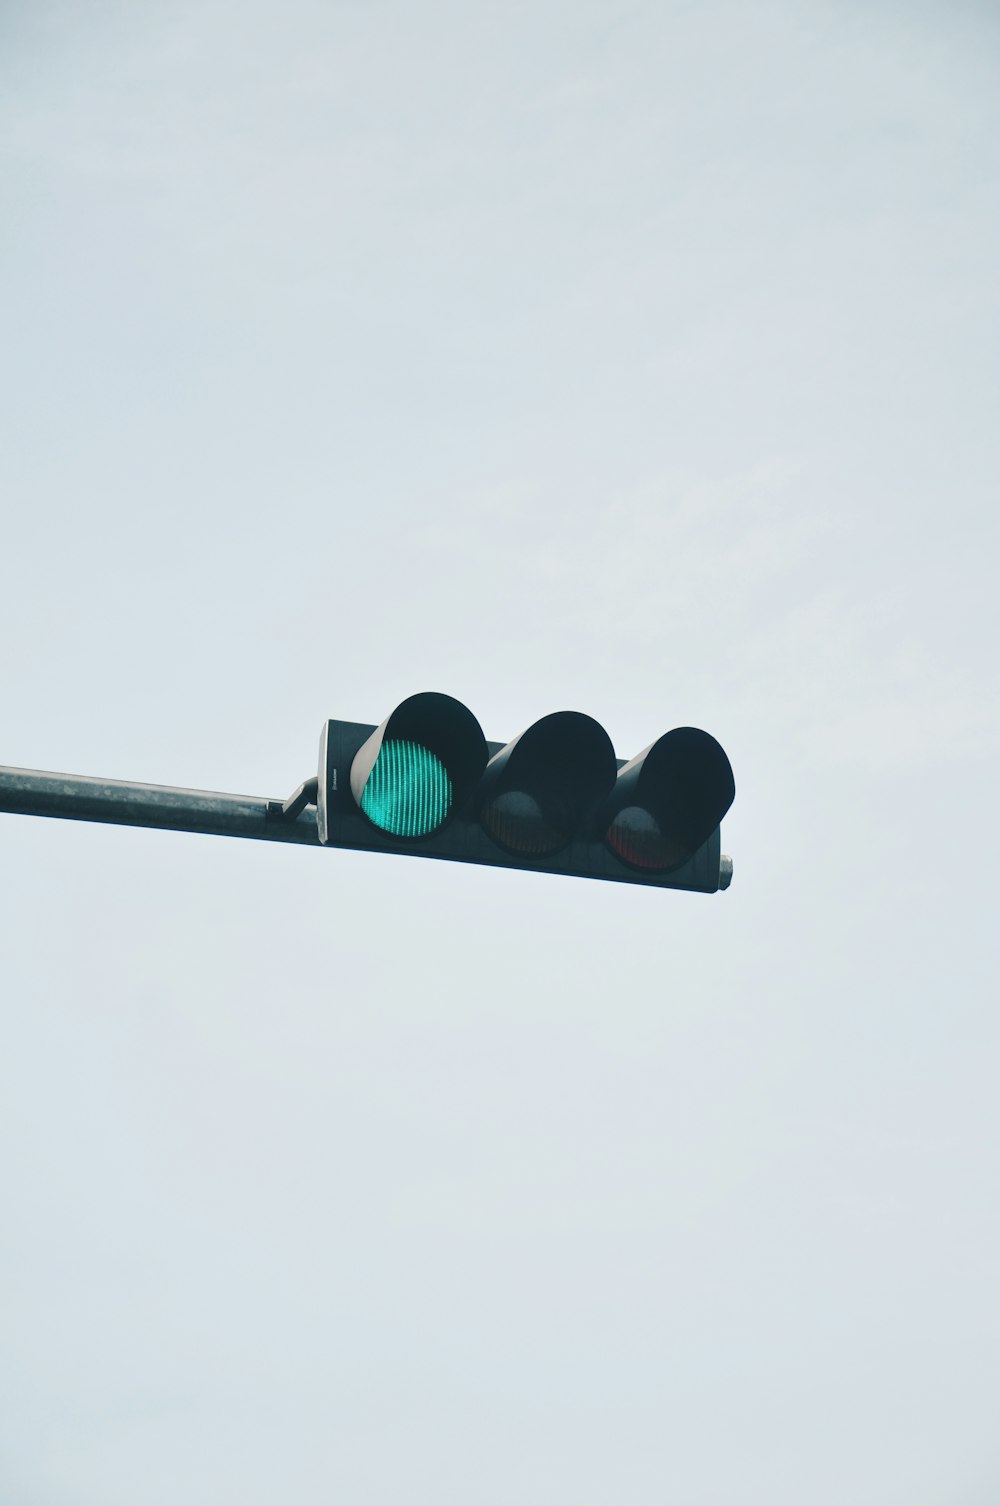 a traffic light that is green on a pole